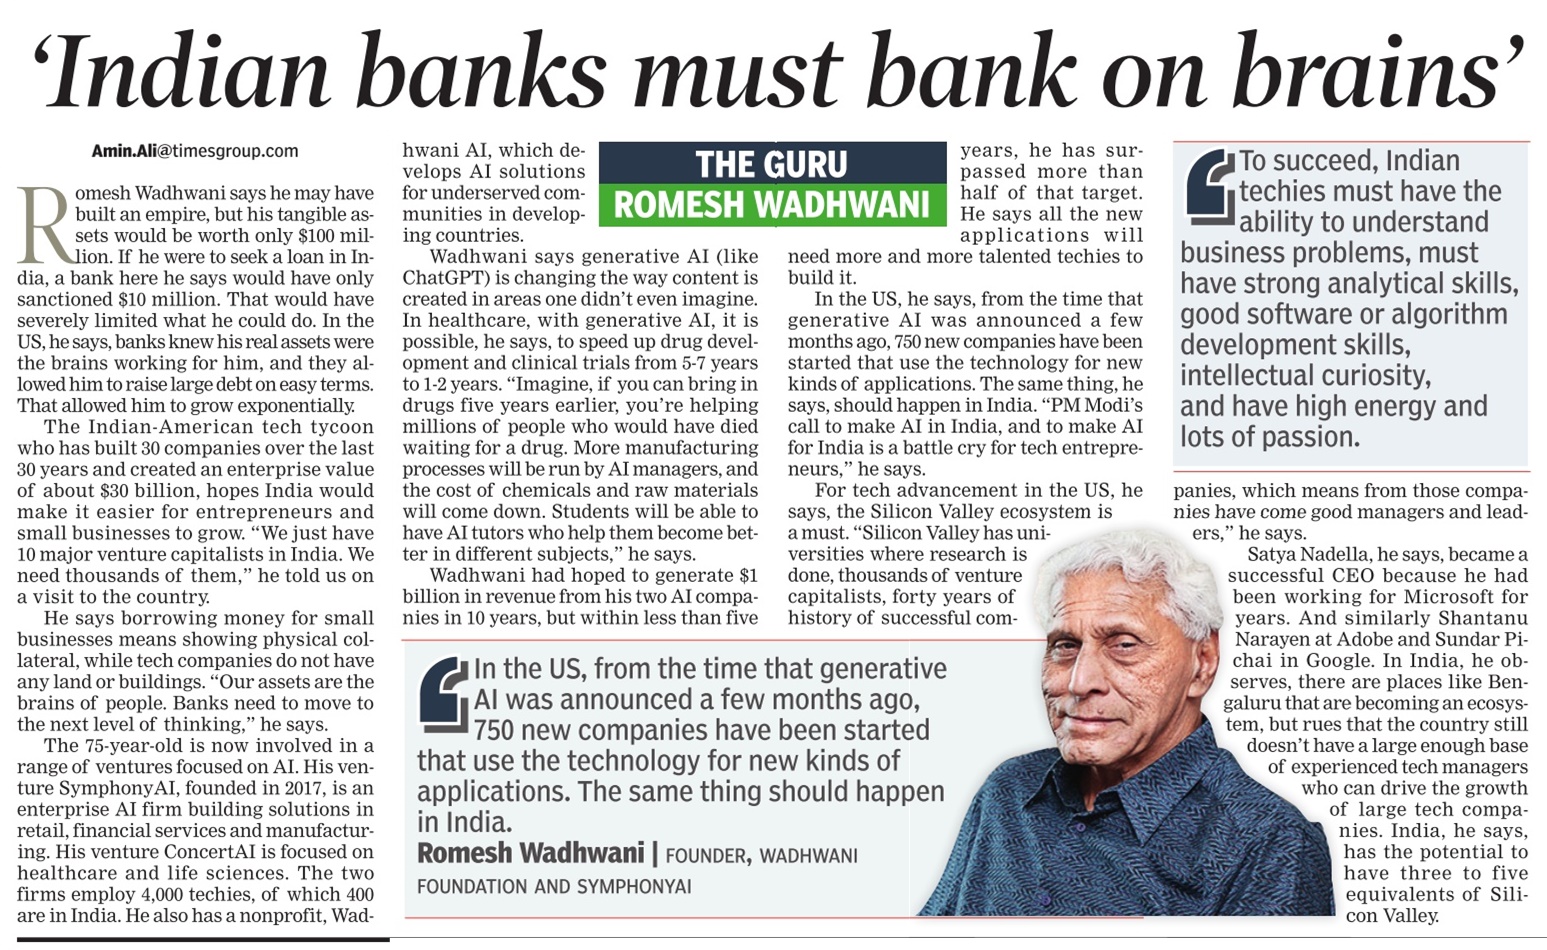 Indian banks must bank on brains